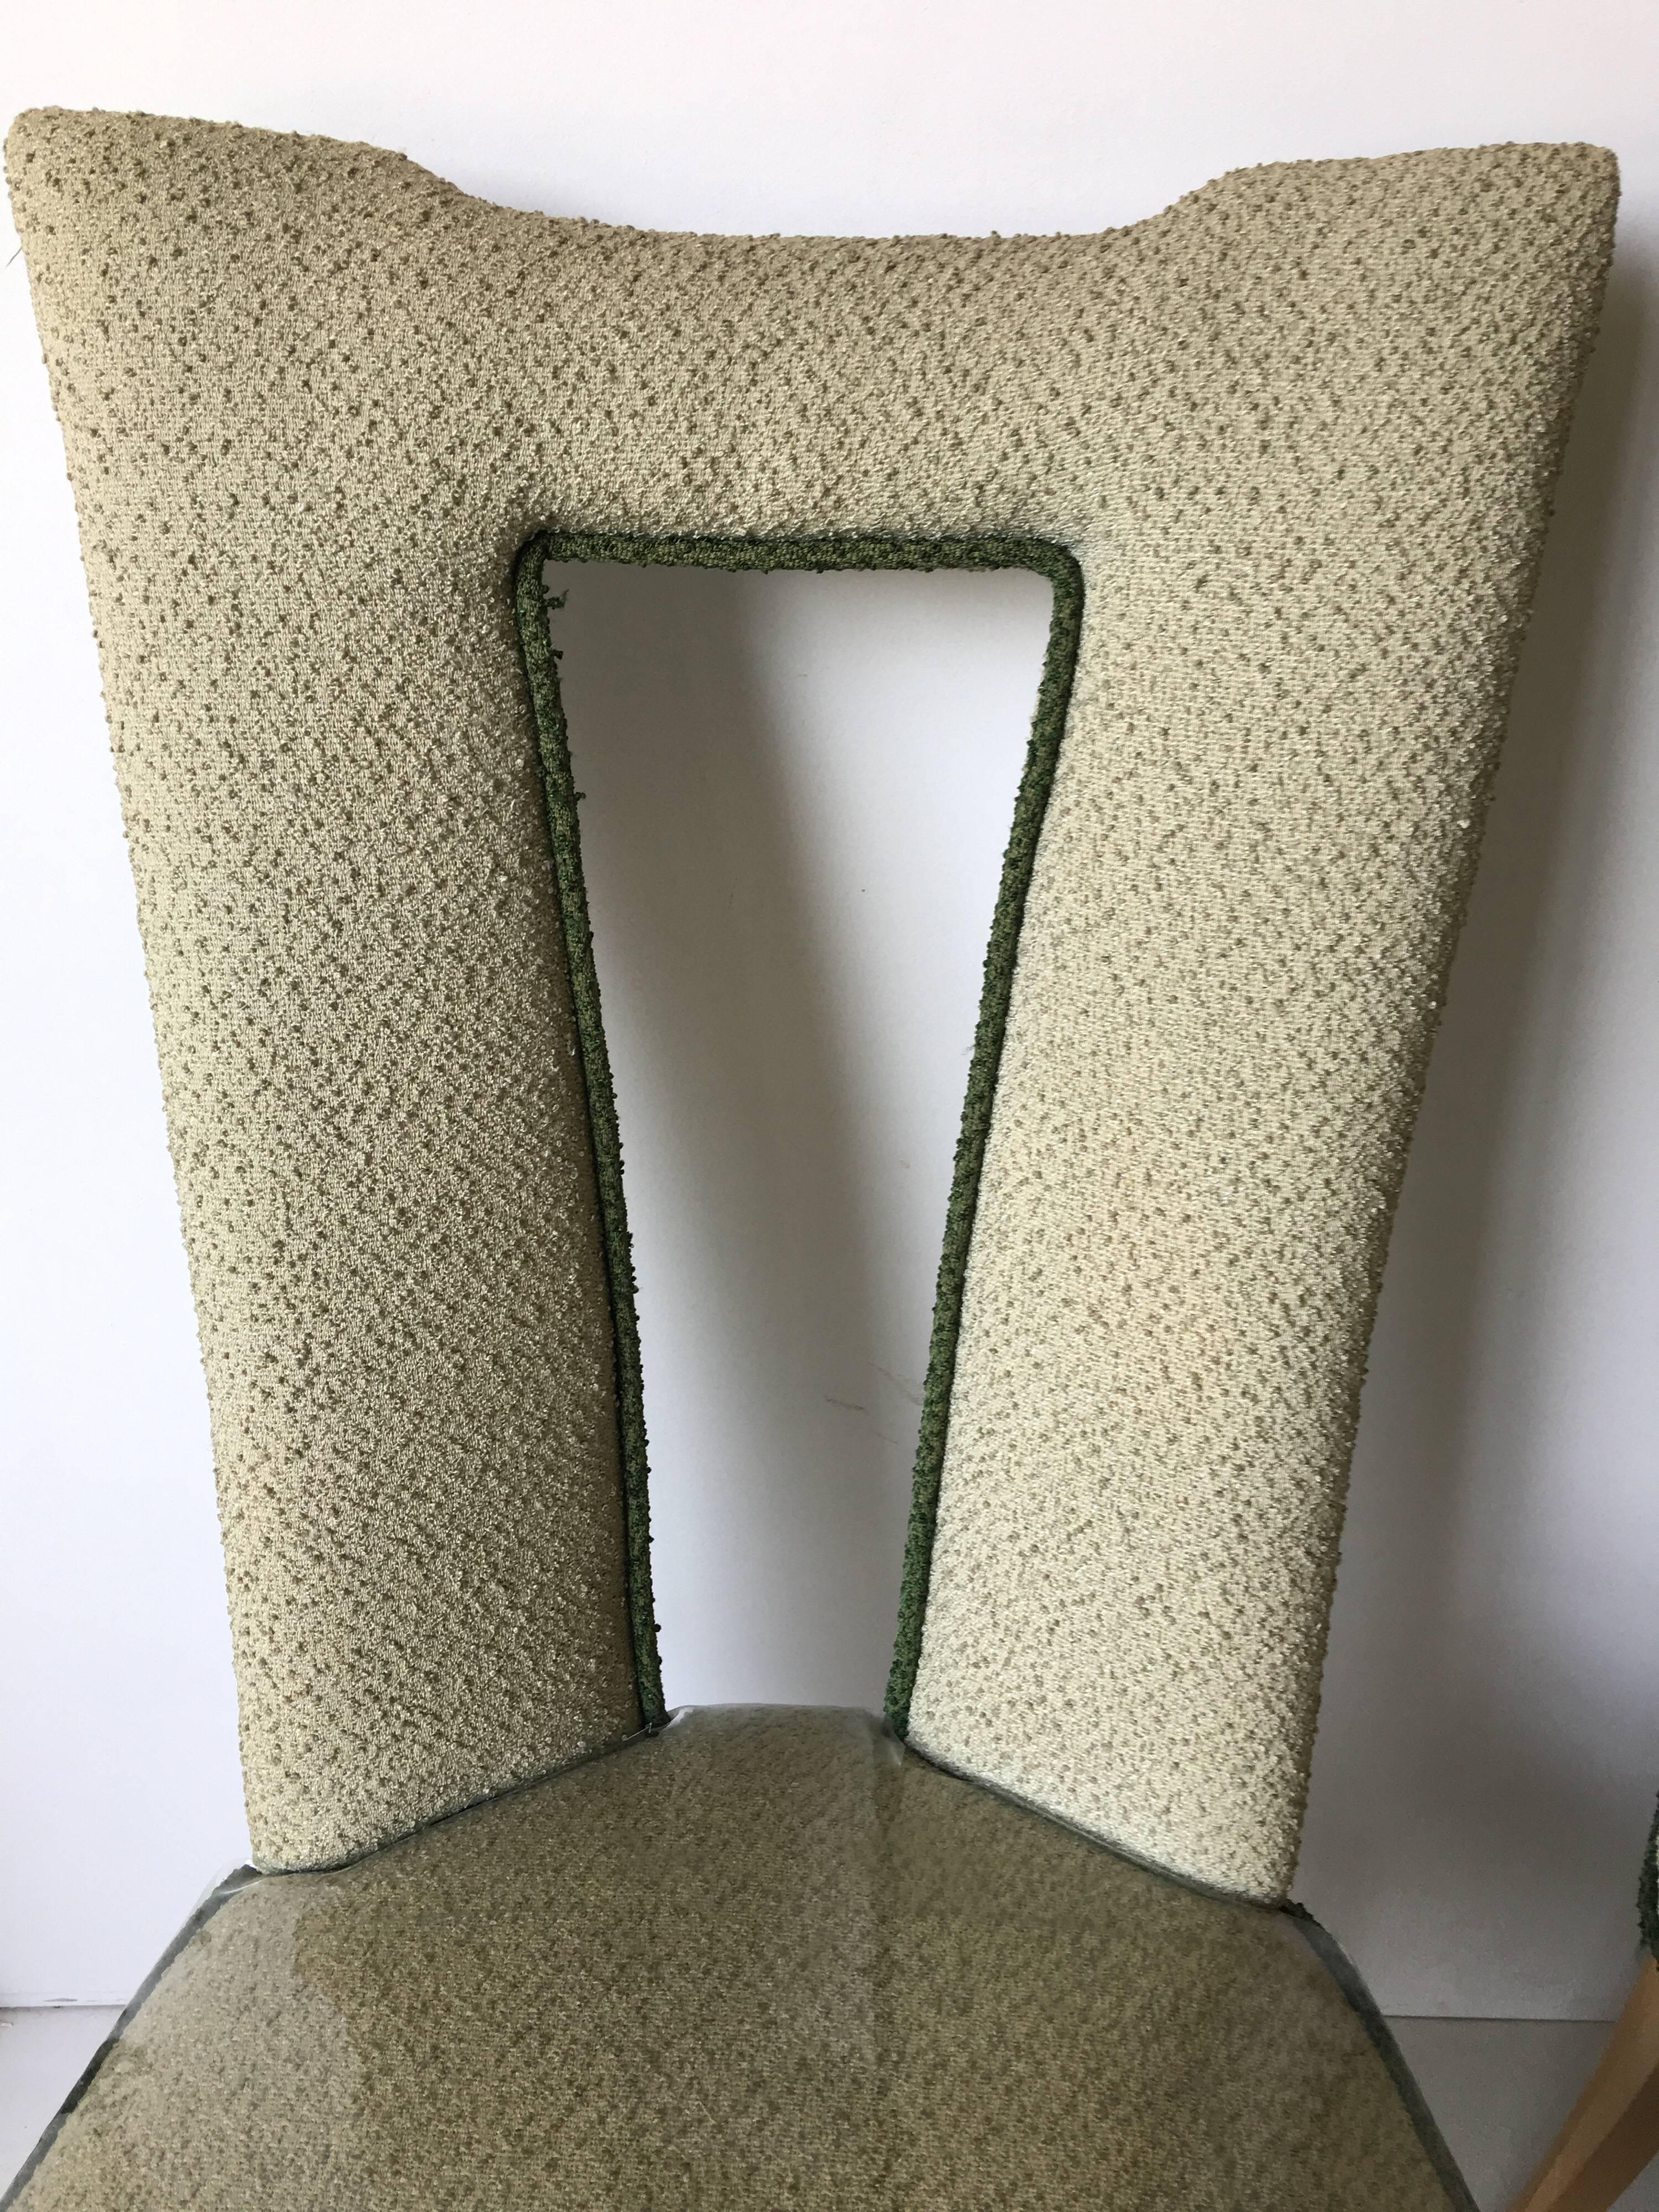 Paul Laszlo Pull-Up Chairs In Good Condition For Sale In Tulsa, OK